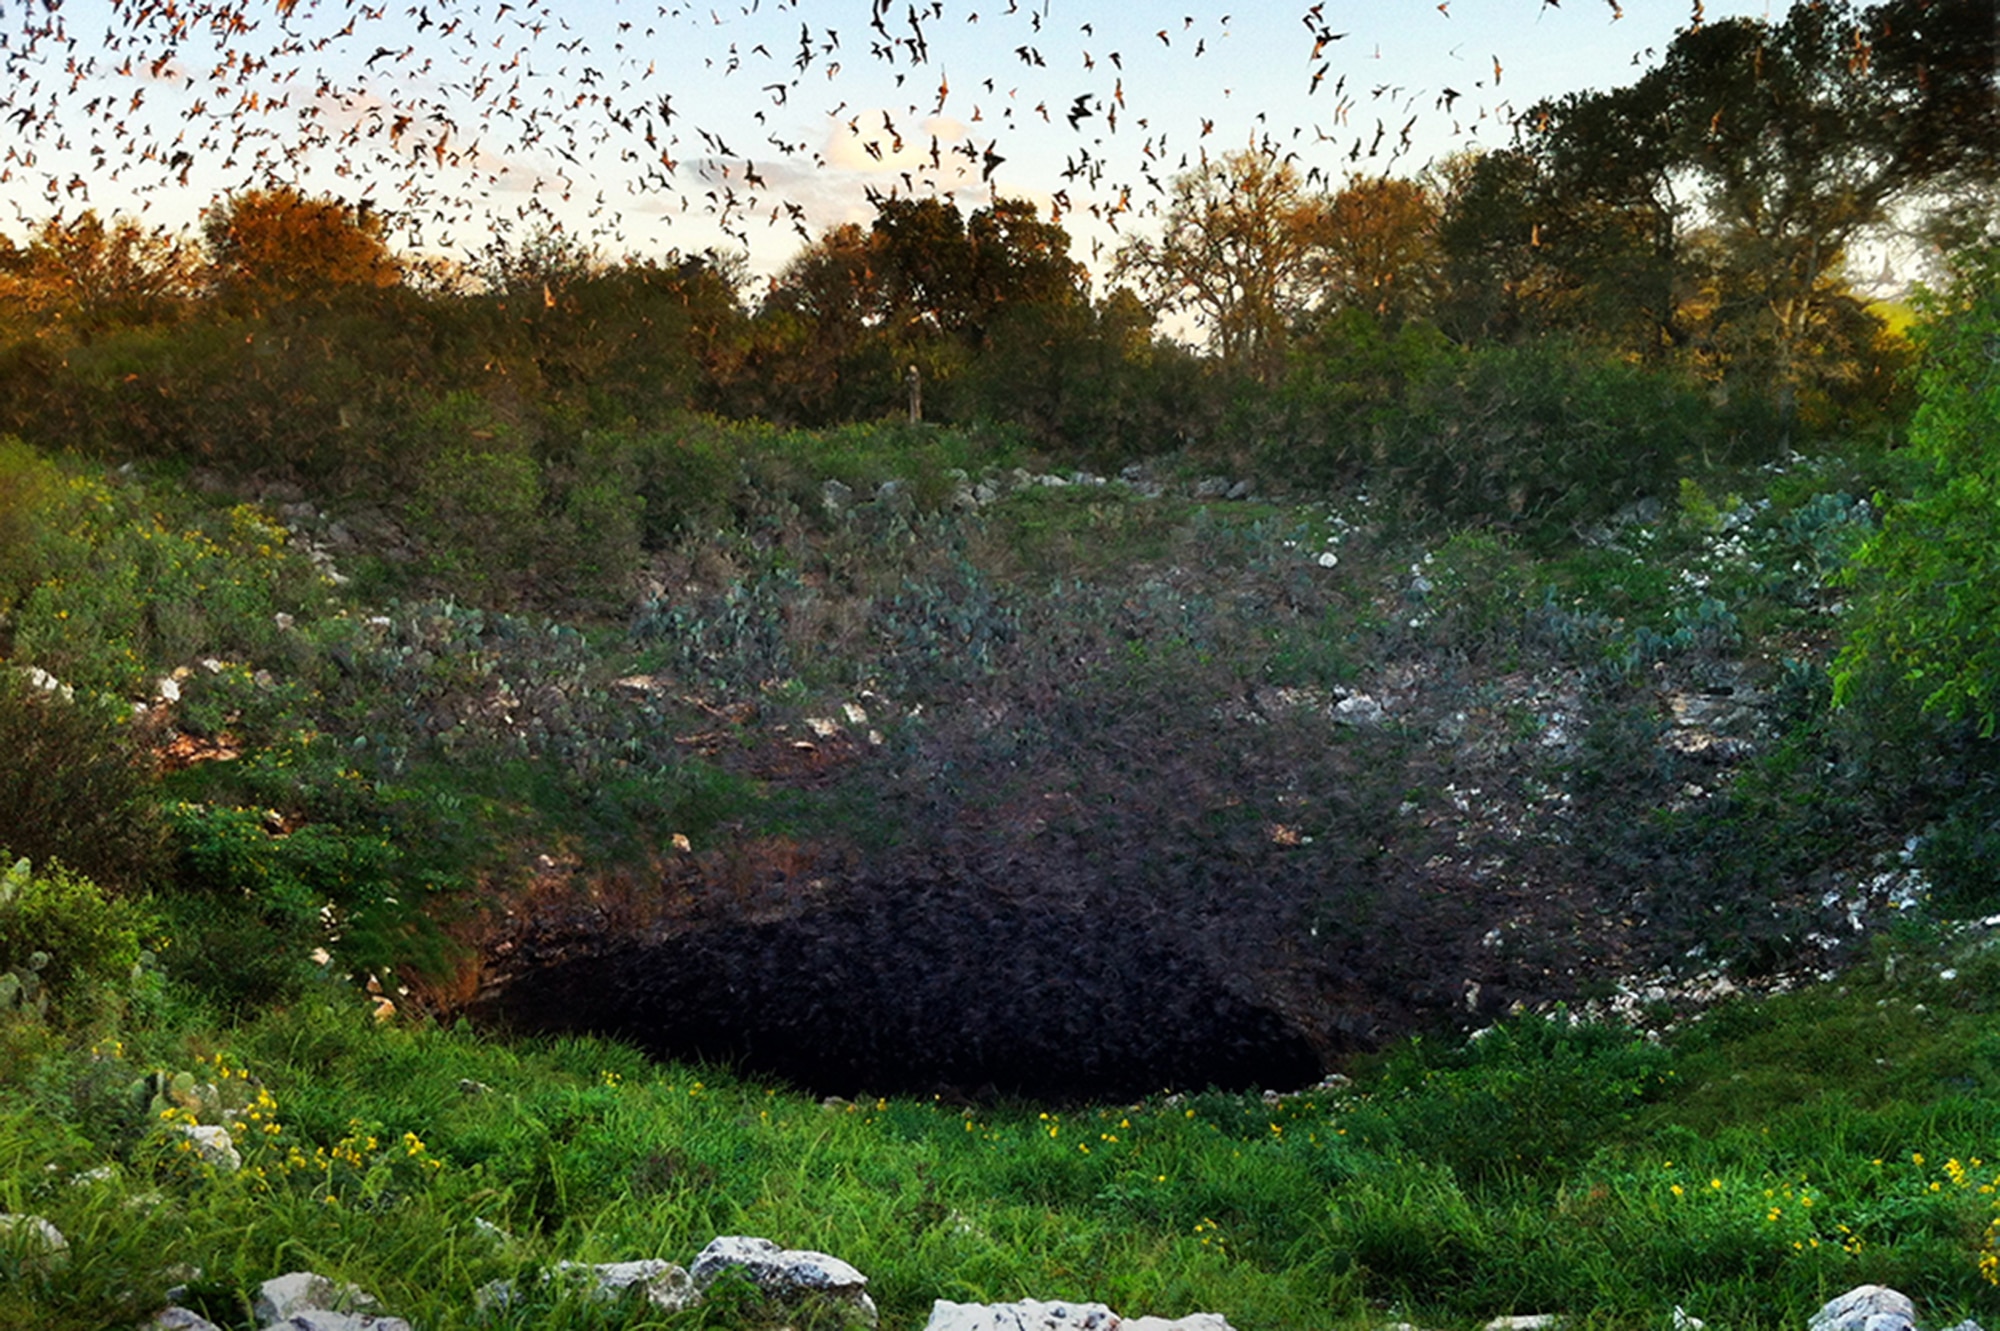 Bats are natural enemies of night-flying insects — and aircraft. The millions of Mexican free-tailed bats at Bracken Bat Cave in Texas eat up to 200 tons of insects nightly, resulting in 20 to 40 feet of guano lying on the cavern floor. The waste goes through a process of natural decomposition aided by guano beetles and decomposing microbes. As a result, guano contains powerful decomposing microbes, which help control soil-borne diseases. Confederate soldiers even mined bat guano for saltpeter to make gunpowder. The U.S. Government at one time even offered free land to those who found guano deposits and made it available to the public. 